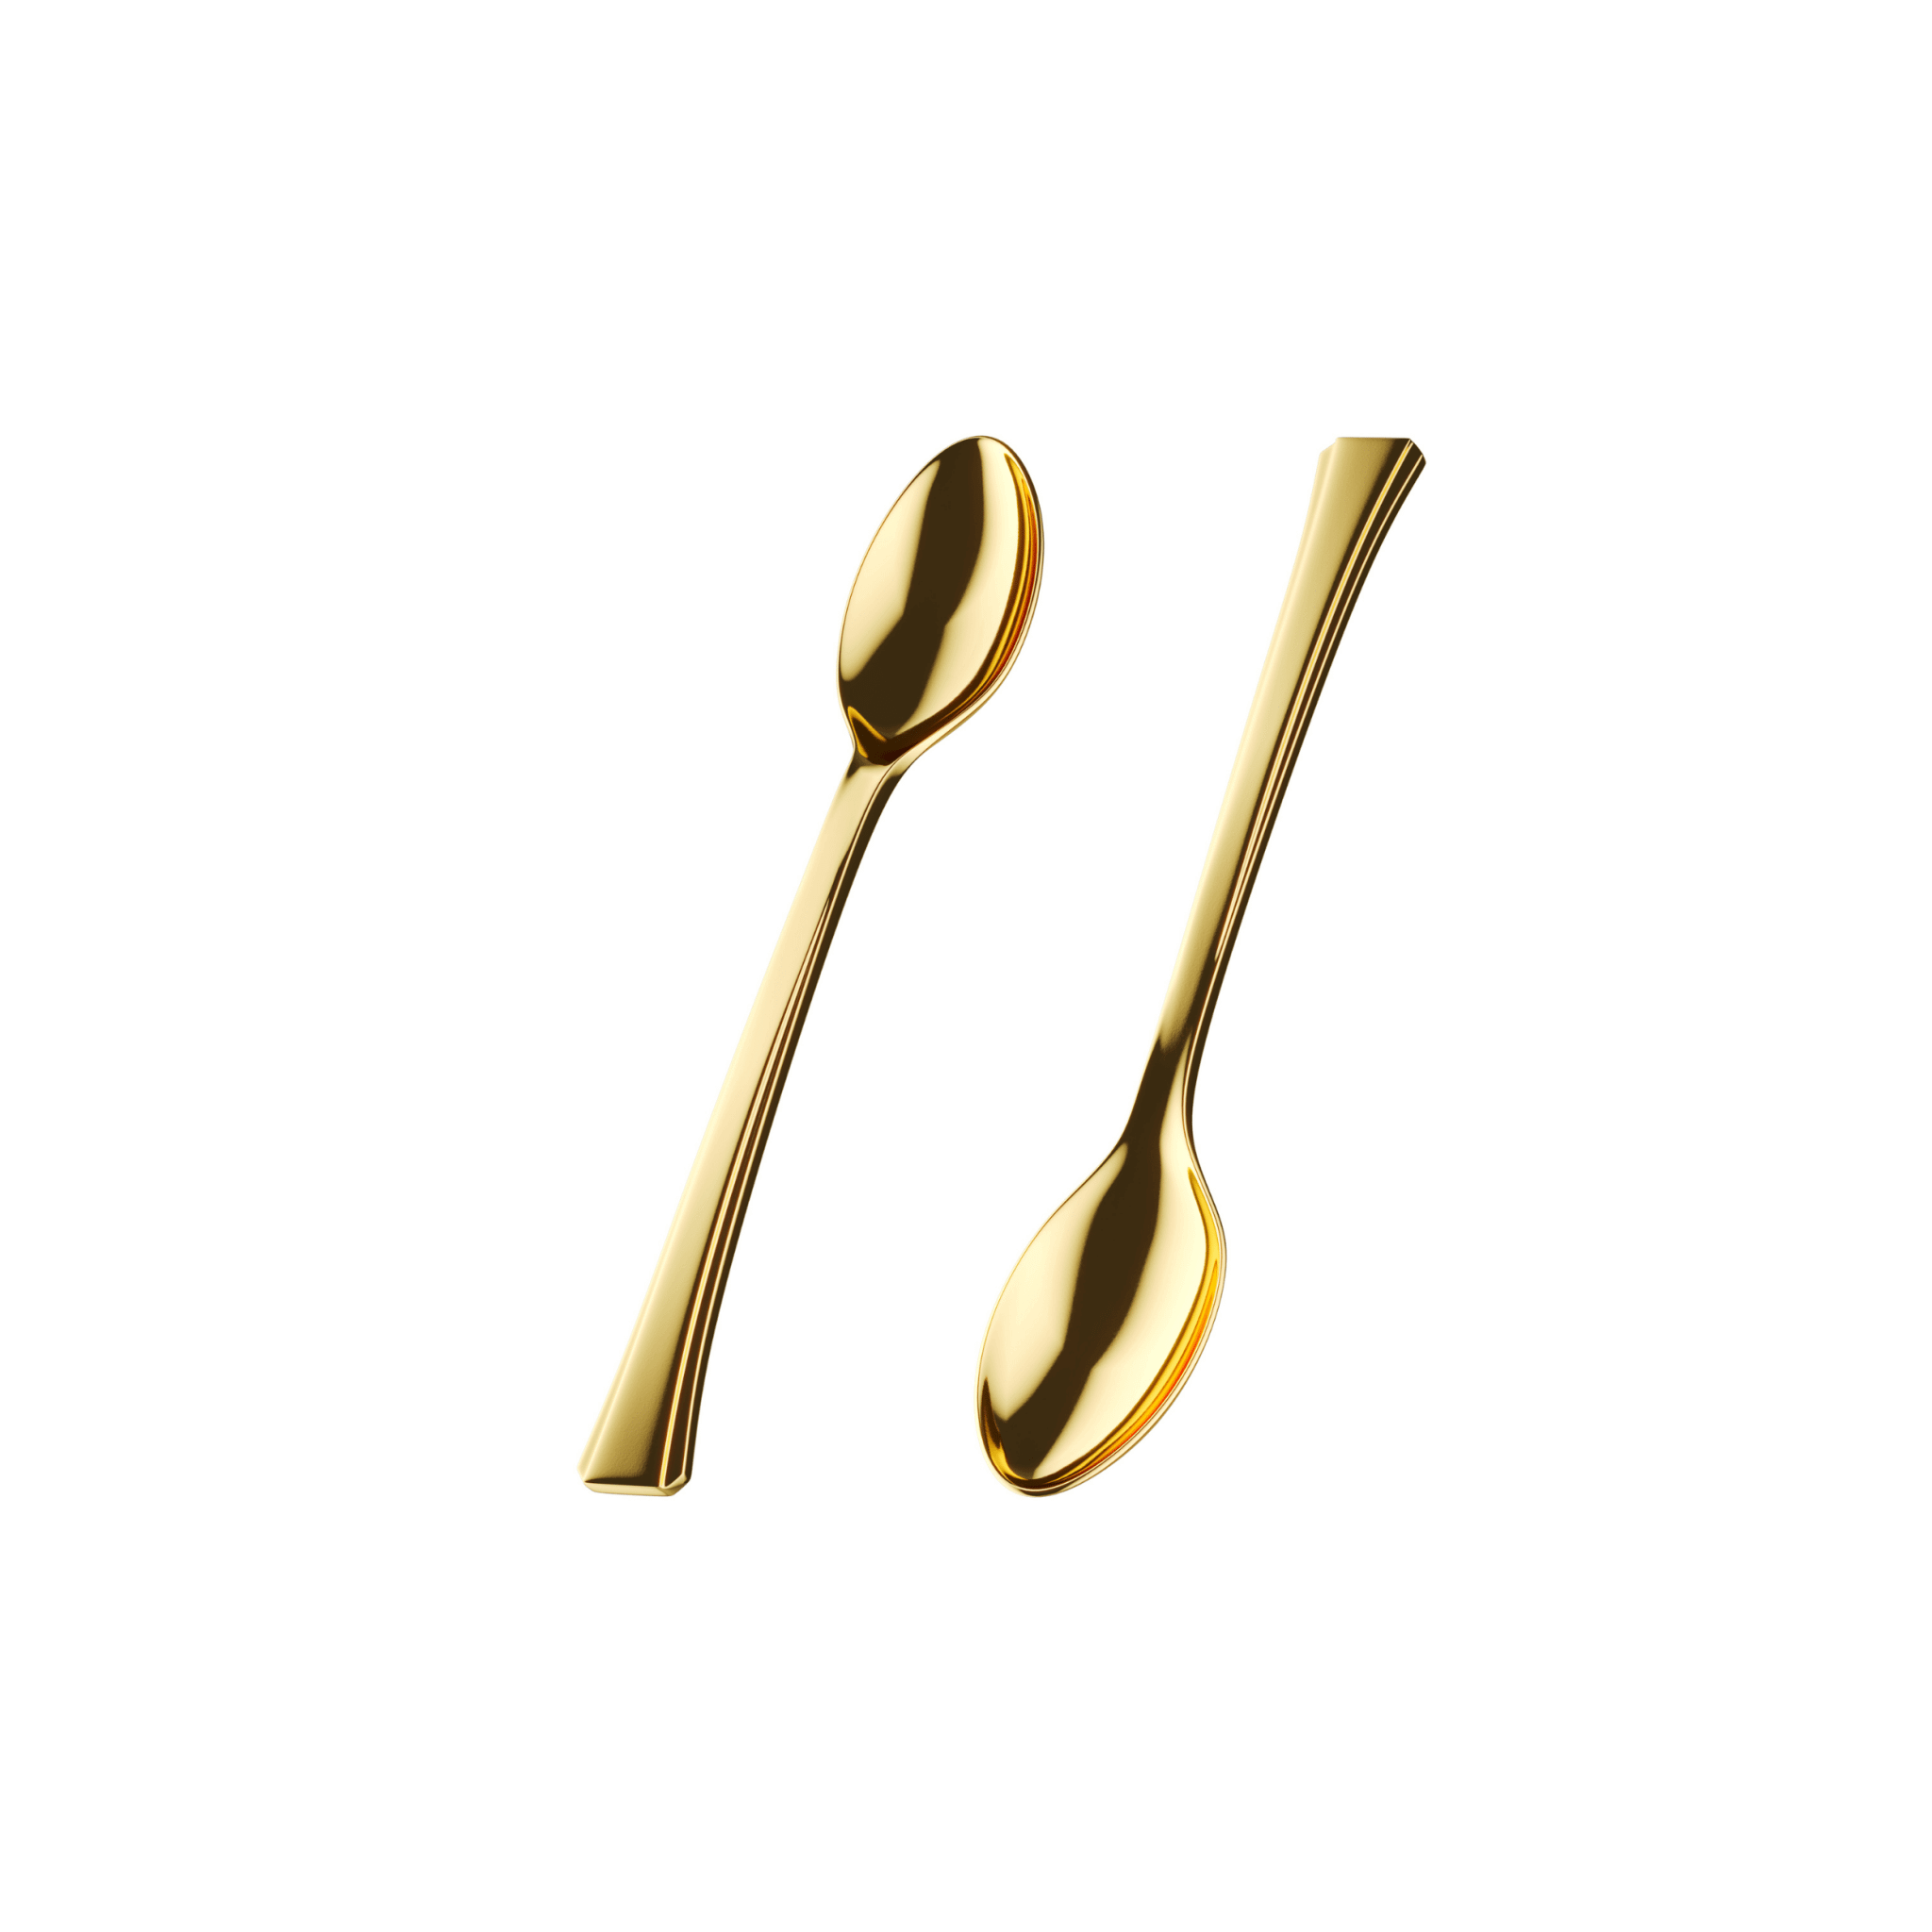 Exquisite Gold Tasting Spoons | 500 Count